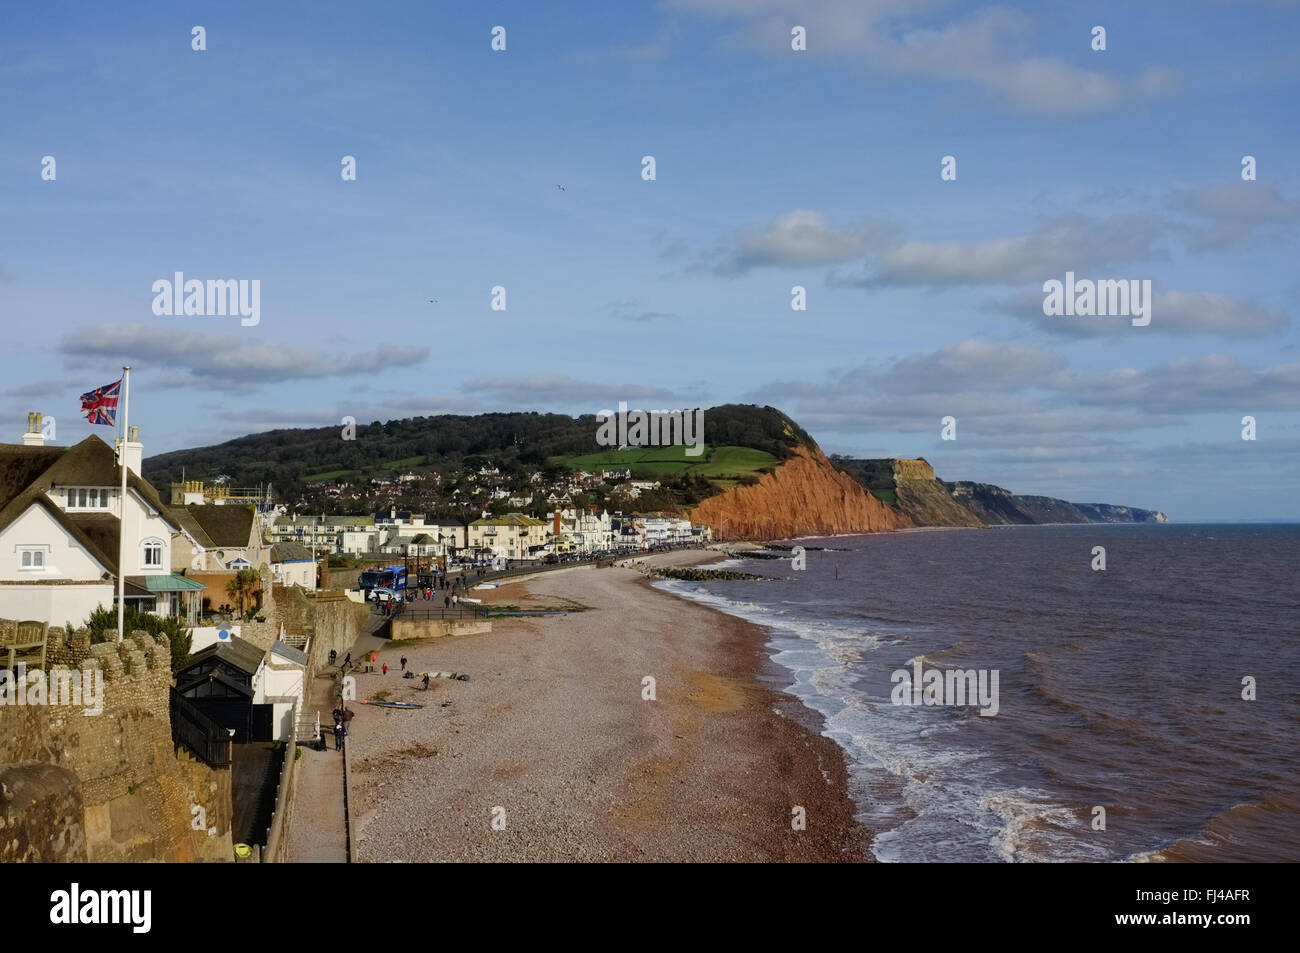 View of Sidmouth coastline and town with people walking on the beach with cliffs in the background. Stock Photo